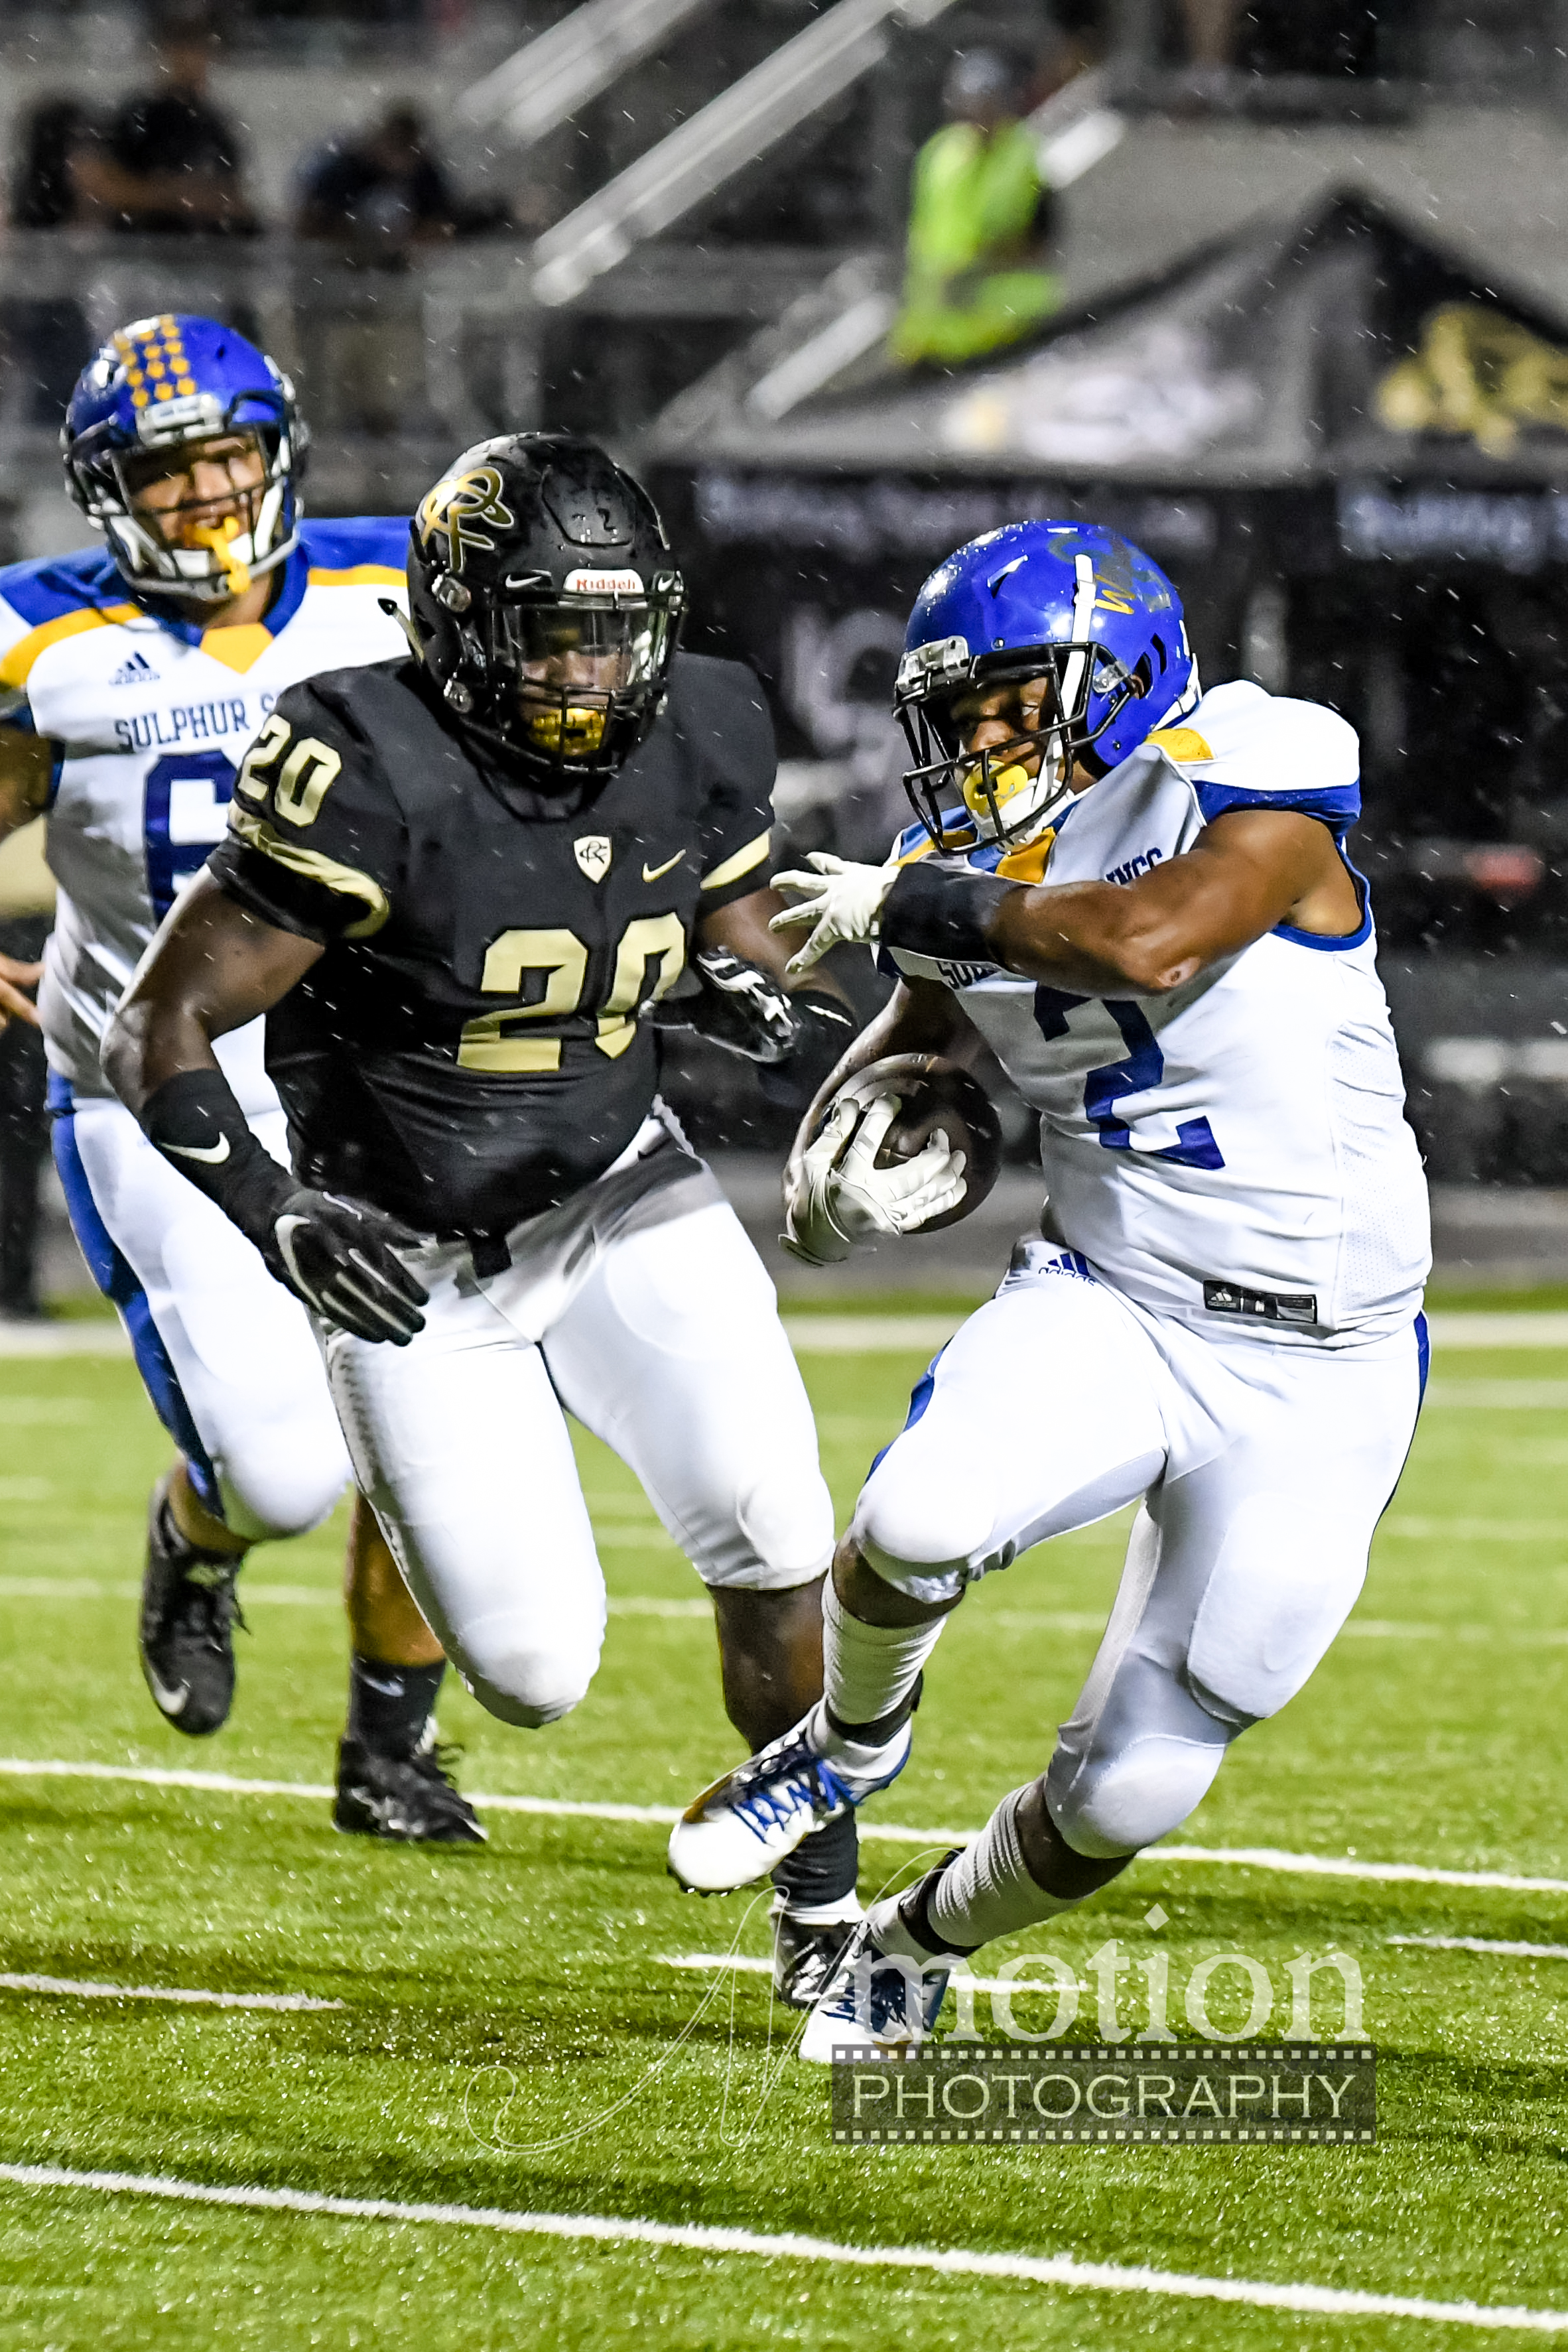 Photos from Sulphur Springs Wildcat Football’s 28-10 Win Over Royse City by Cathy Bryan of Nmotion Photography!